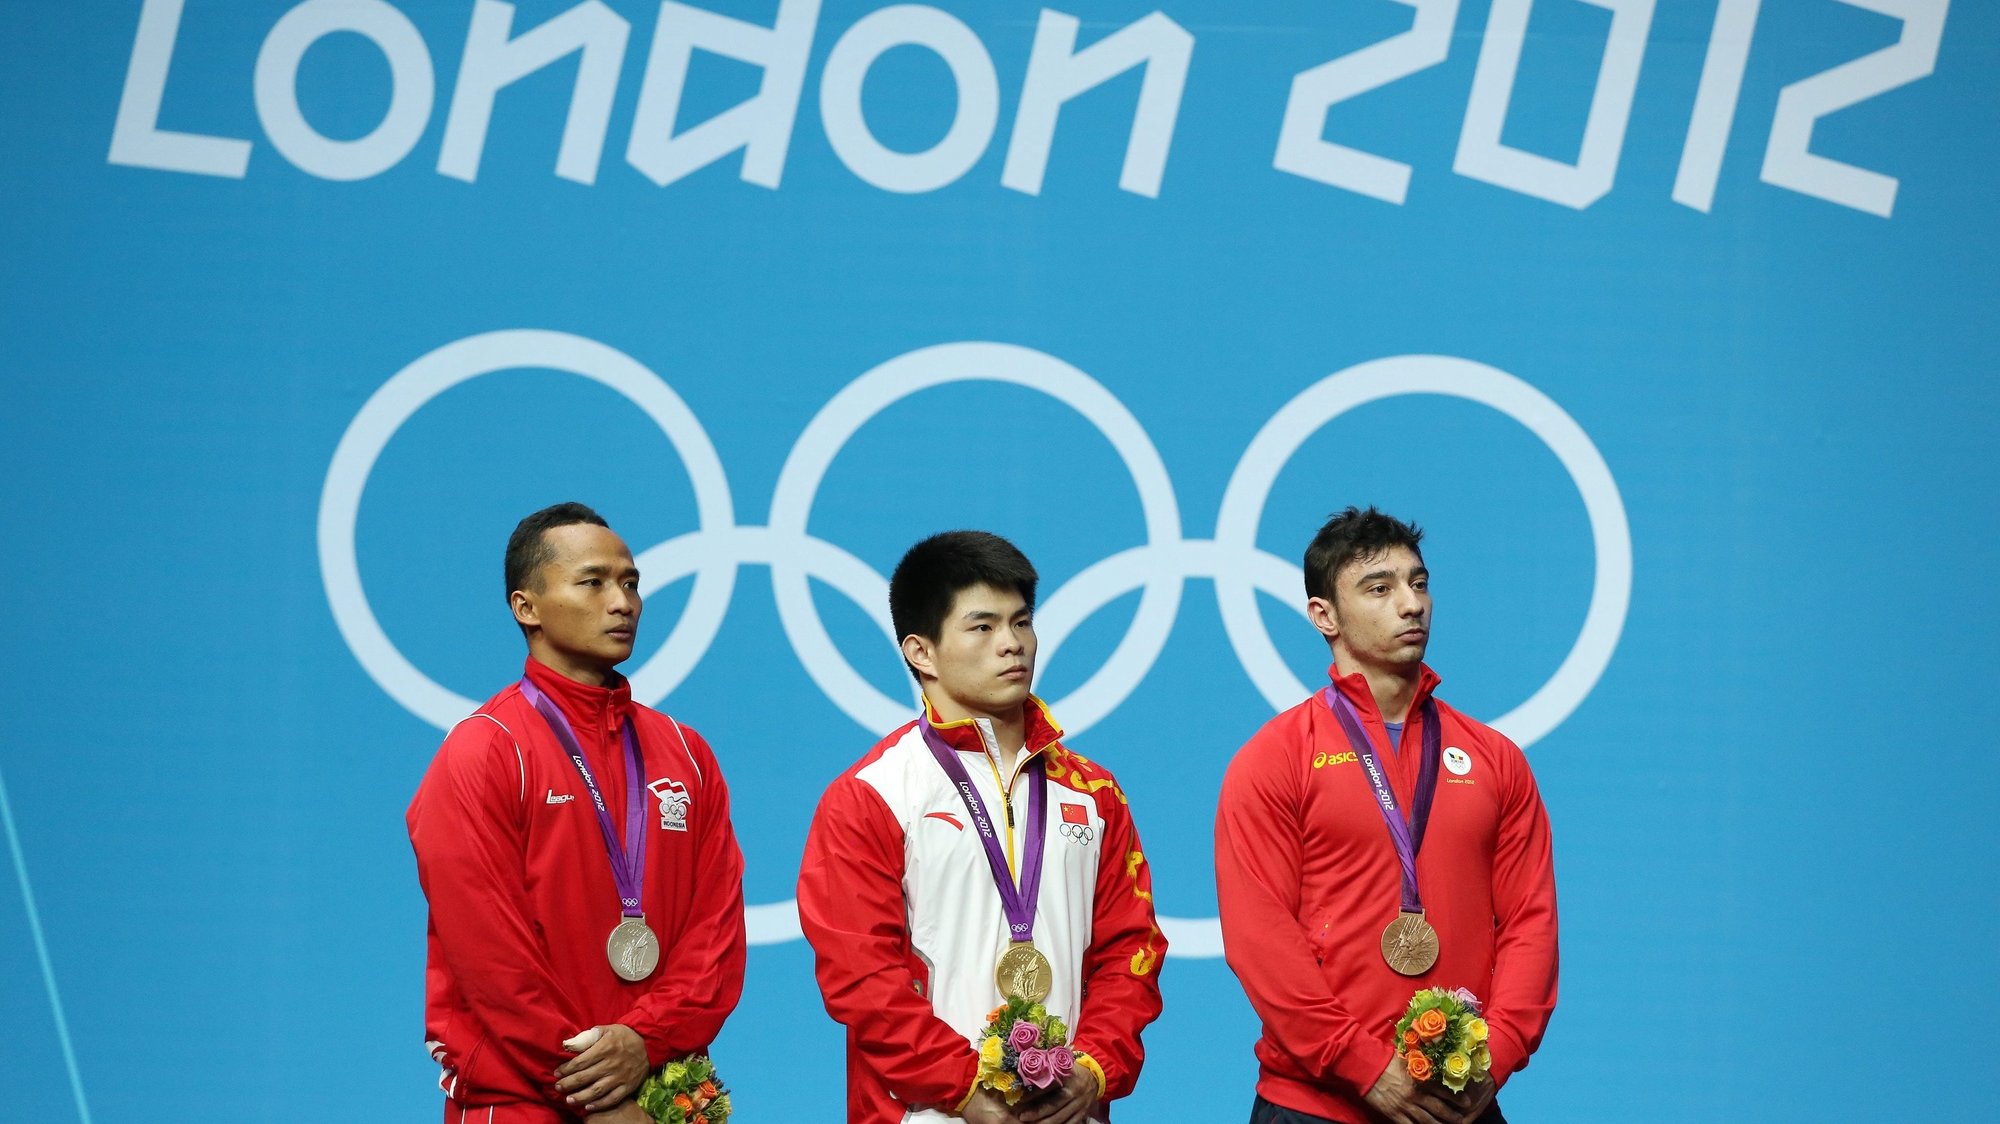 epa03330876 (L-R) Silver medalist Triyatno Triyatno of Indonesia, gold medalist Qingfeng Lin of China and bronze medalist Constantin Razvan Martin of Romania during the medal ceremony in the men&#039;s 69 kg category in the London 2012 Olympic Games weightlifting competition, London, Great Britain, 31 July 2012.  EPA/LINDSEY PARNABY